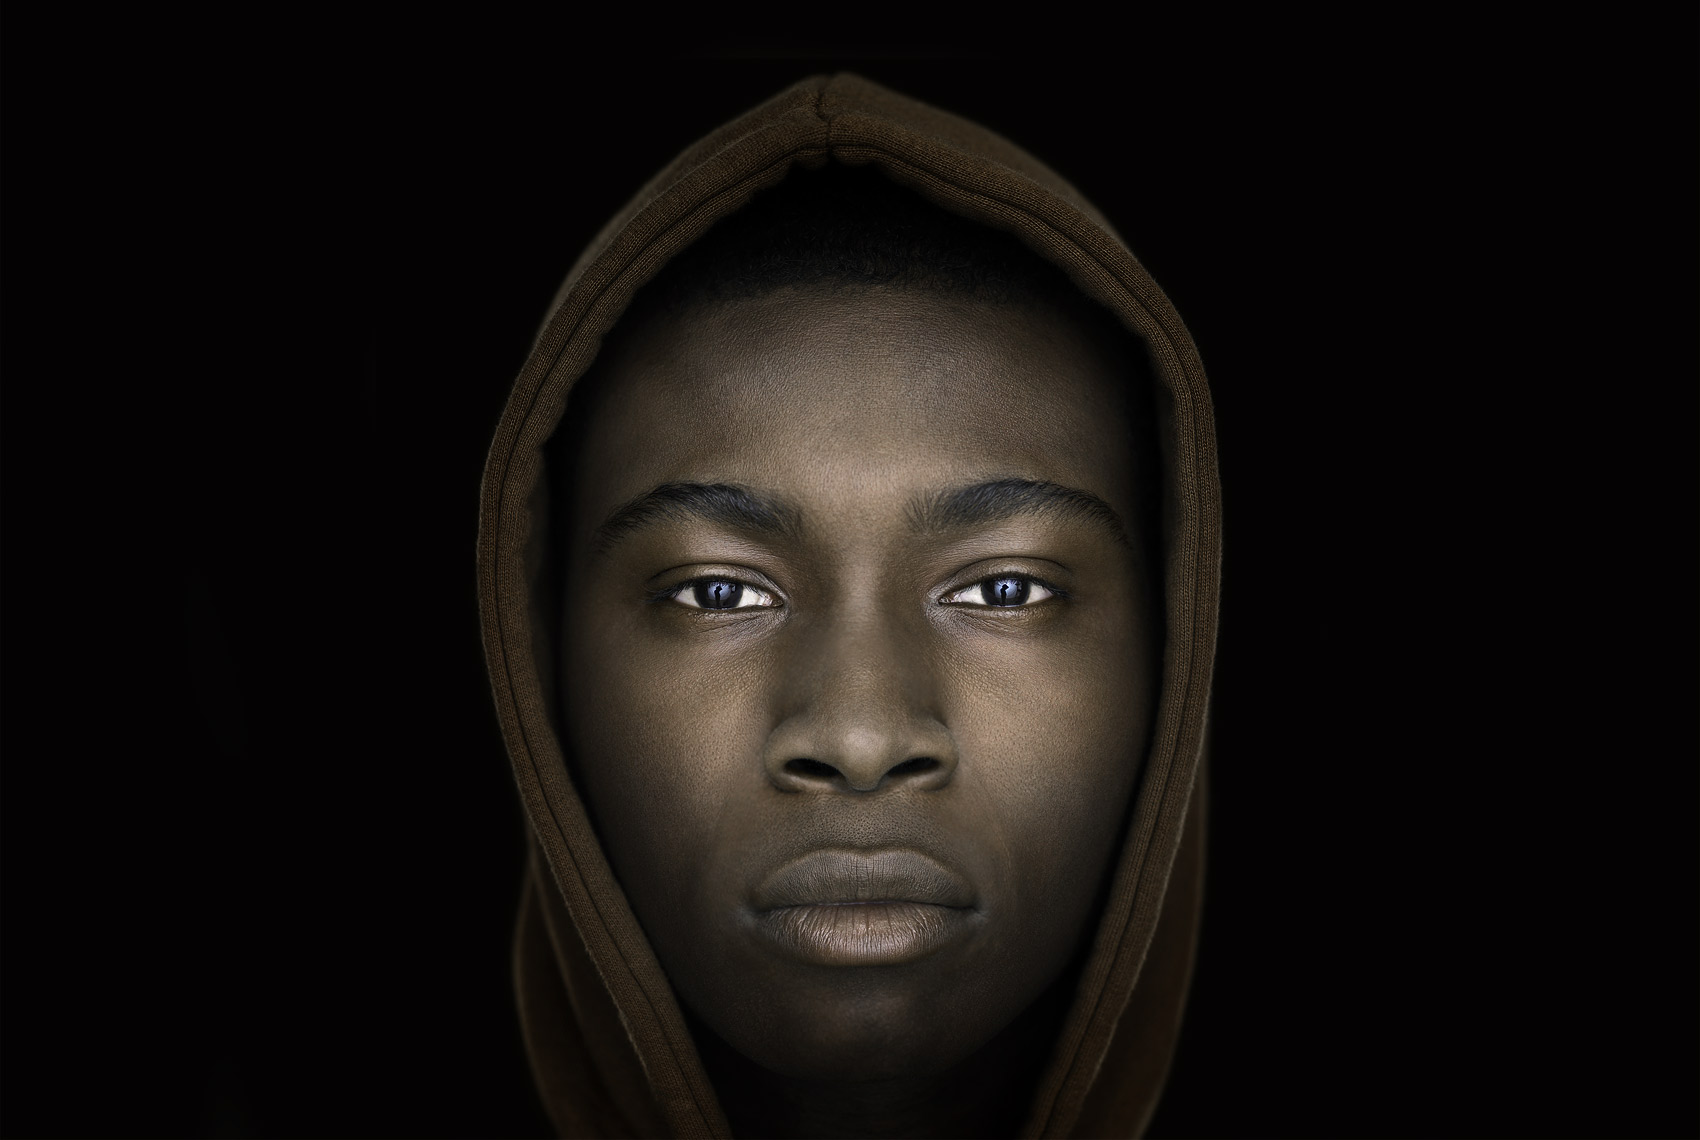 Studio portrait of a young African American man with hooded sweatshirt